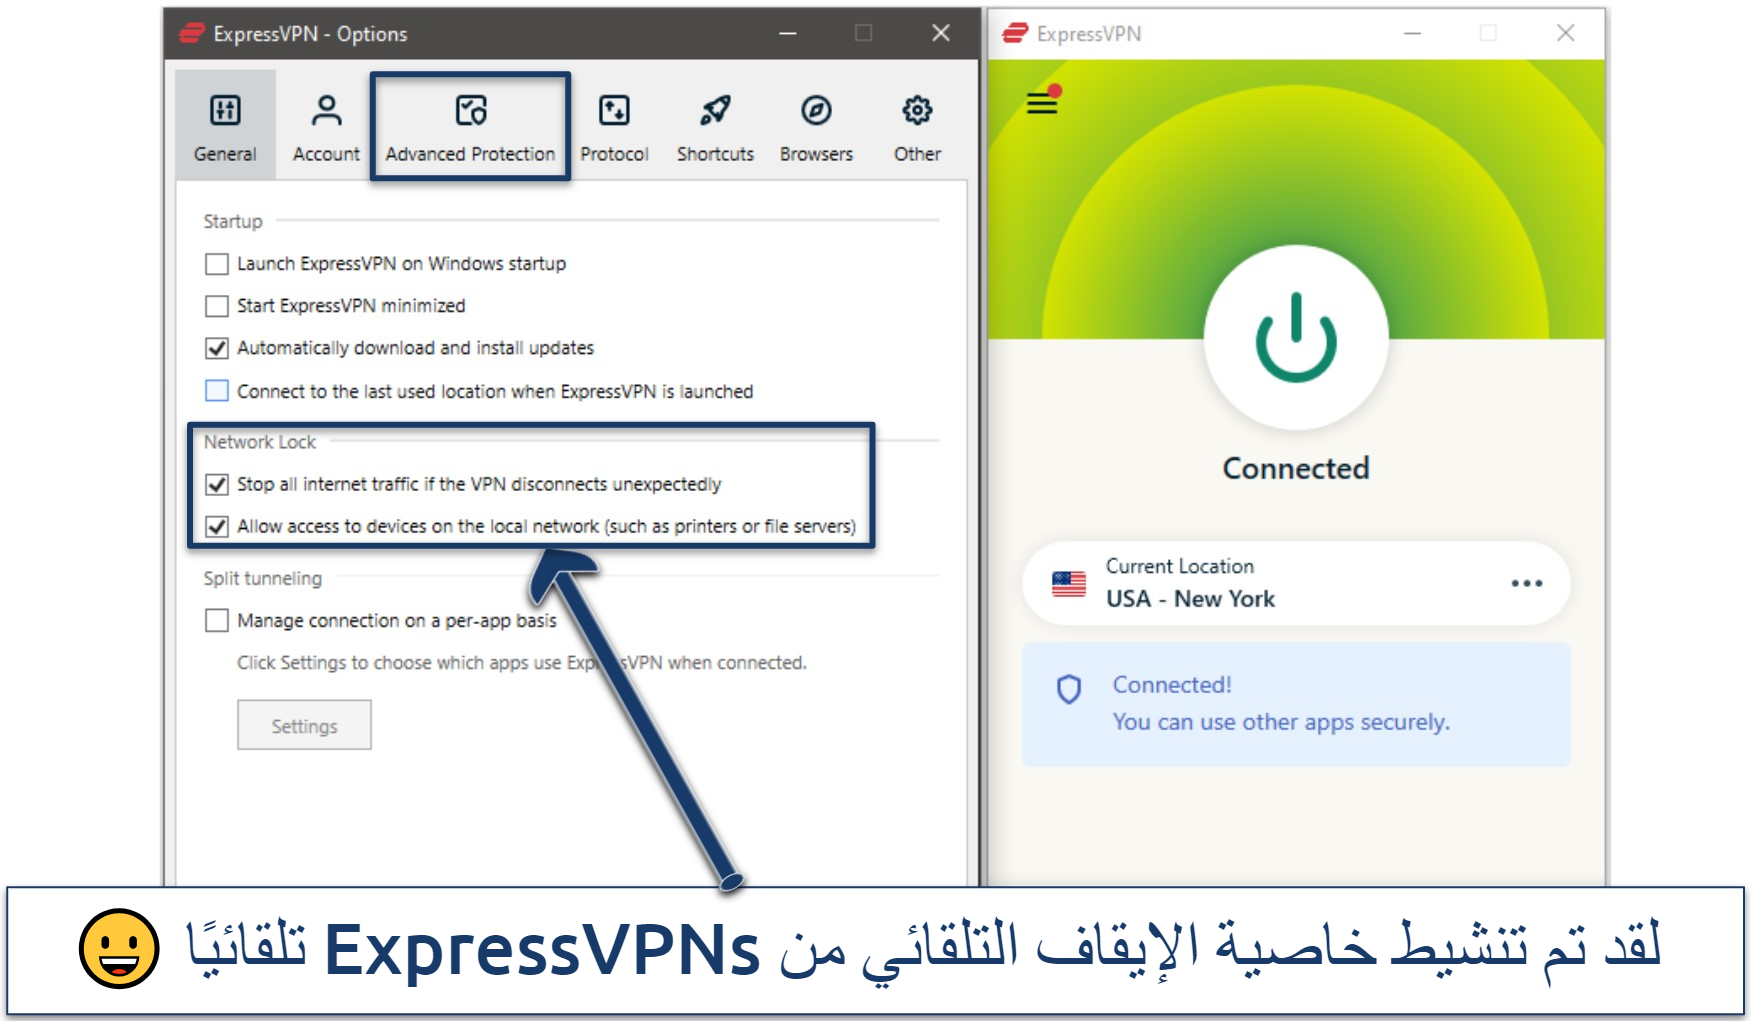 Screenshot of ExpressVPN's settings showing general settings and Network Lock, with ExpressVPN connected to New York